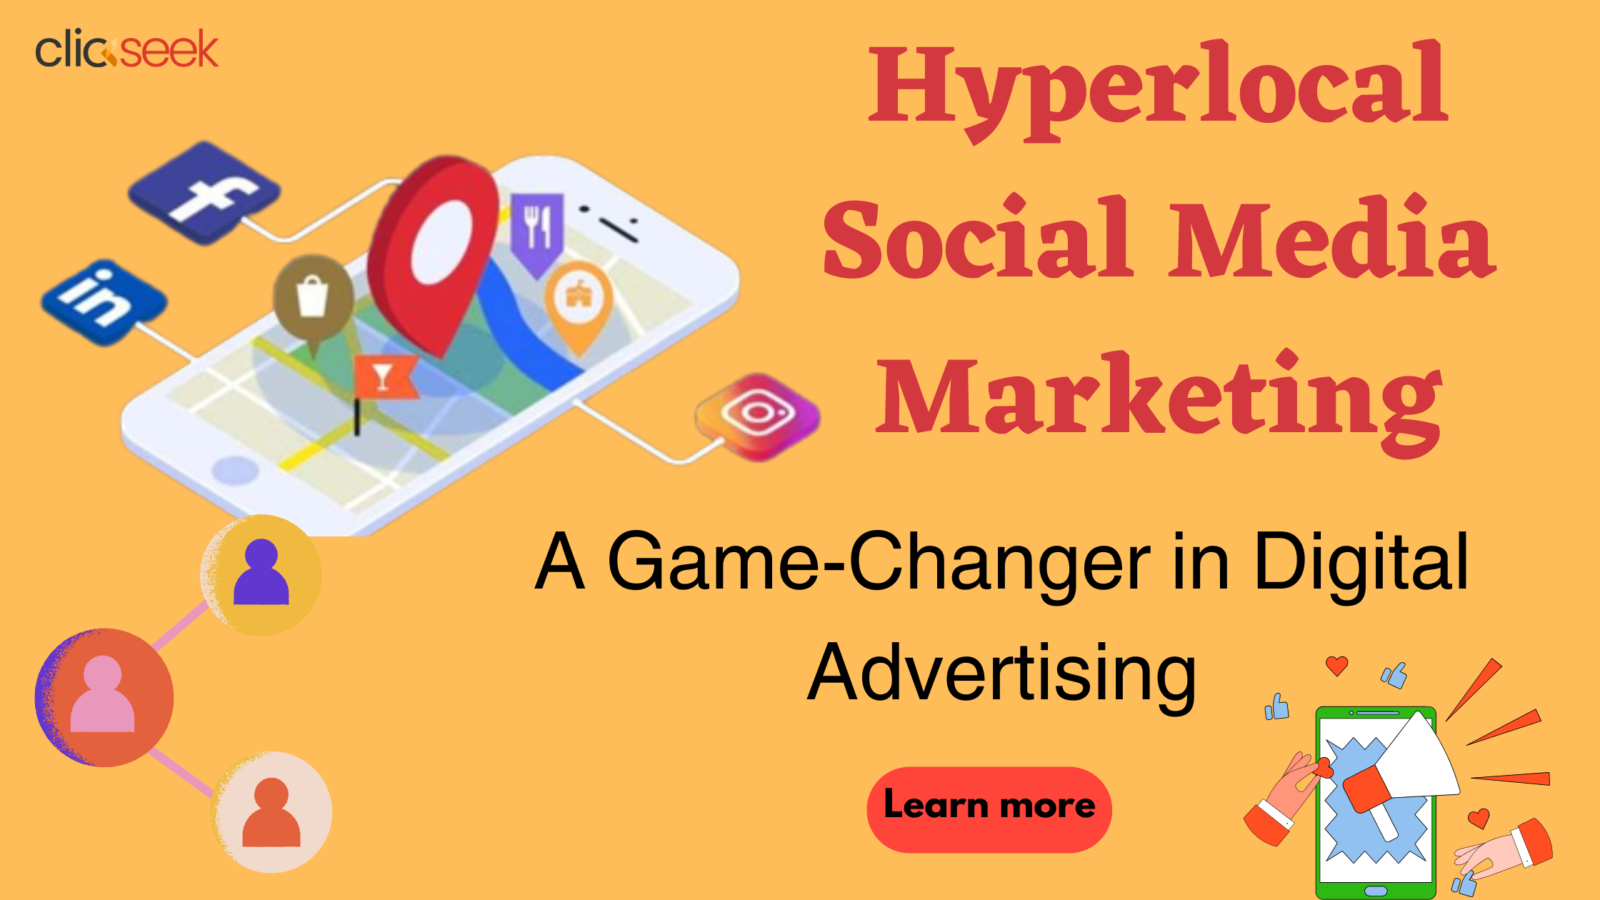 The Rise of Hyperlocal Social Media Marketing: A Game-Changer in Digital Advertising